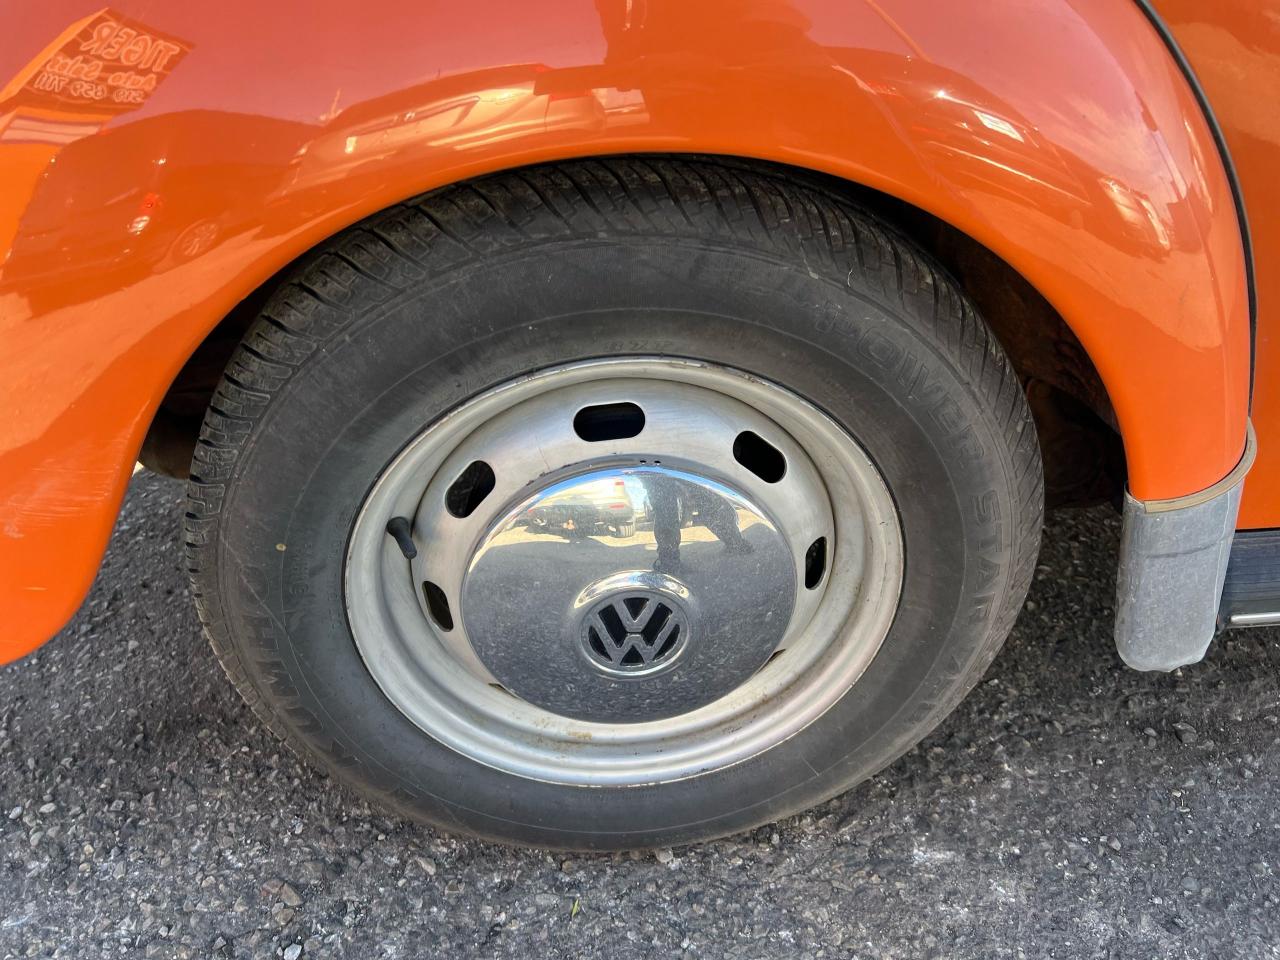 1975 Volkswagen Beetle VERY CLEAN*WELL MAINTAINED*RUNS AND DRIVES GREAT* - Photo #12